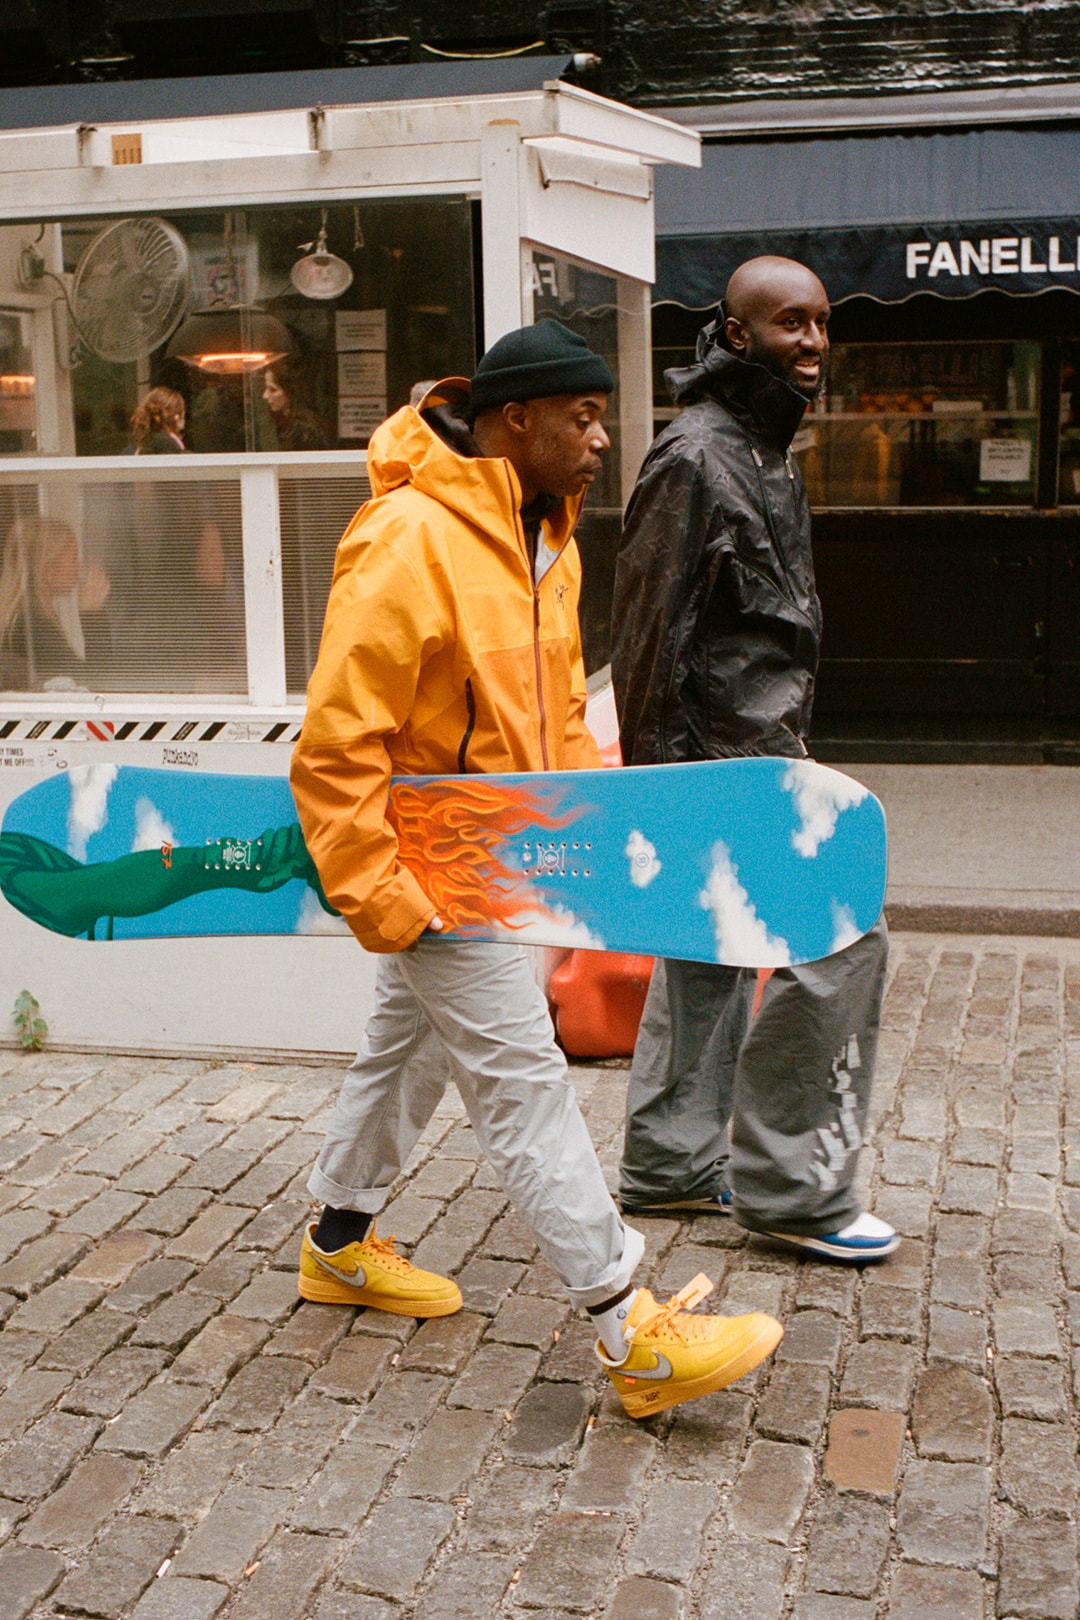 Virgil Abloh Russell Winfield ride Snowboards Algorythm Evo auction results Black-led youth-serving organizations Hoods to Woods The Service Board SHRED Foundation.